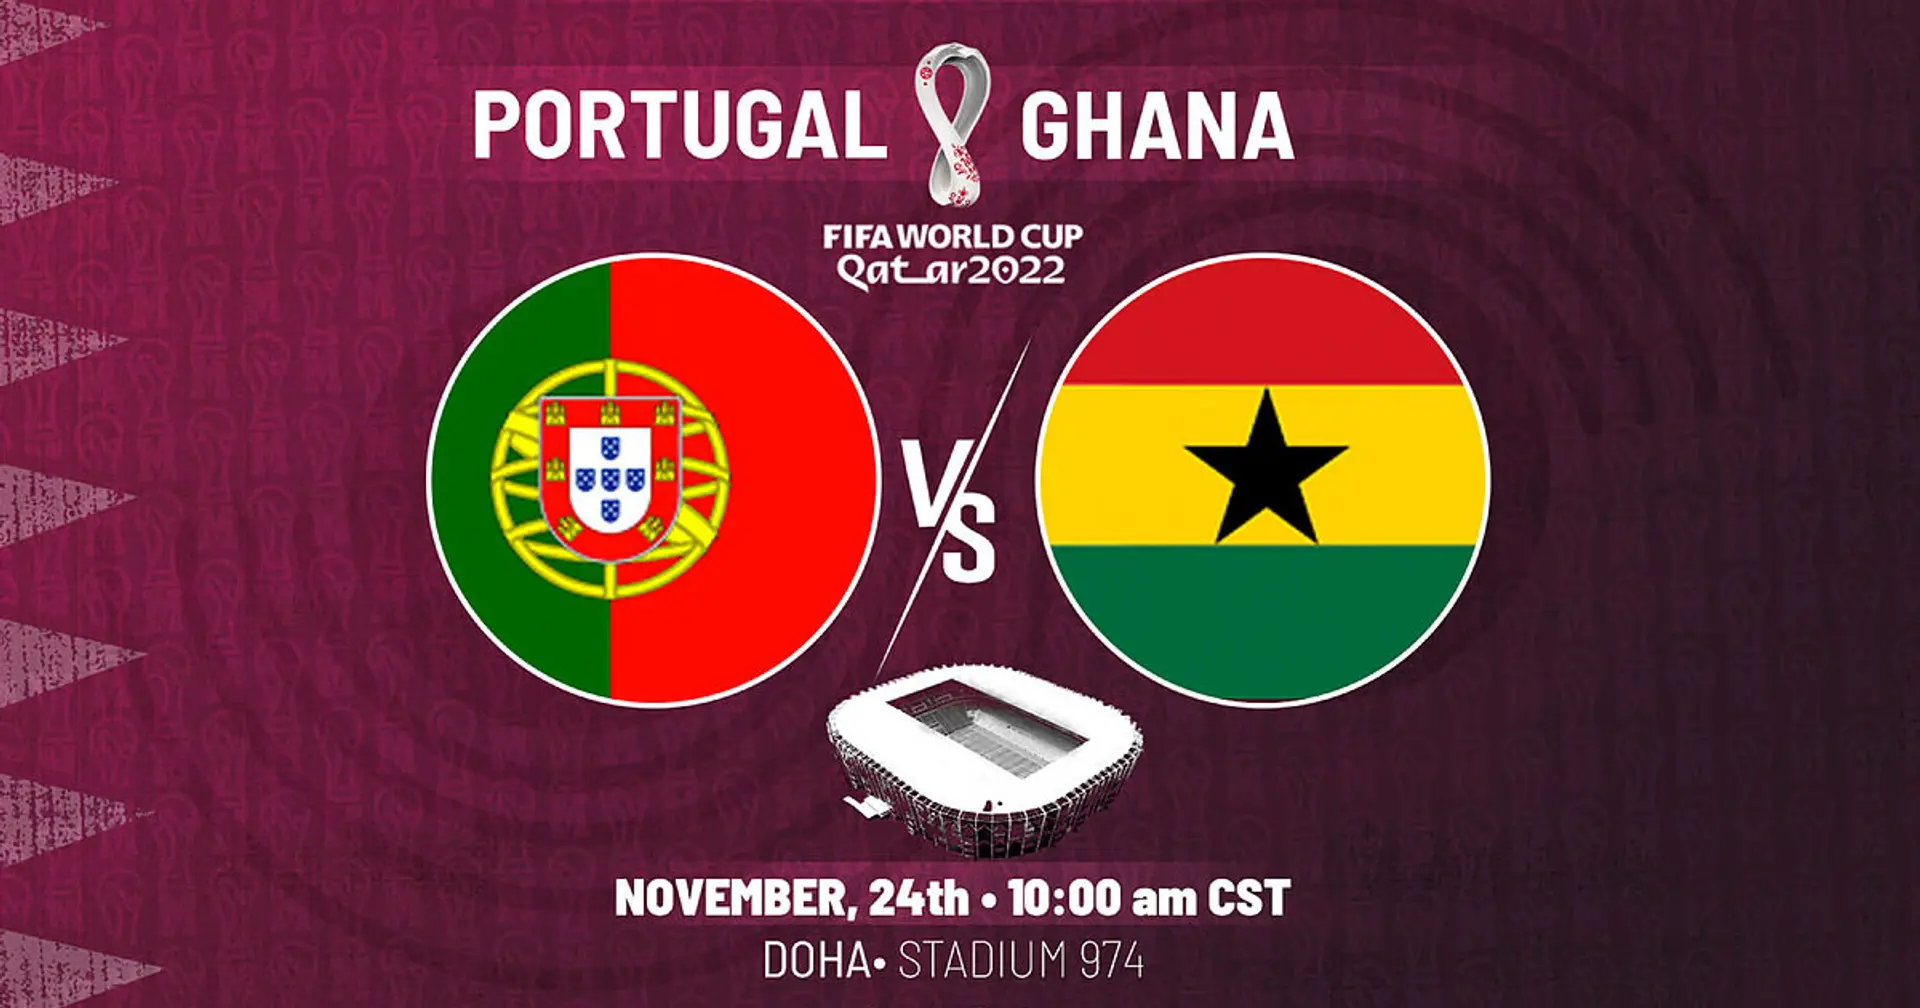 Portugal vs Ghana: Official team lineups for the World Cup clash revealed